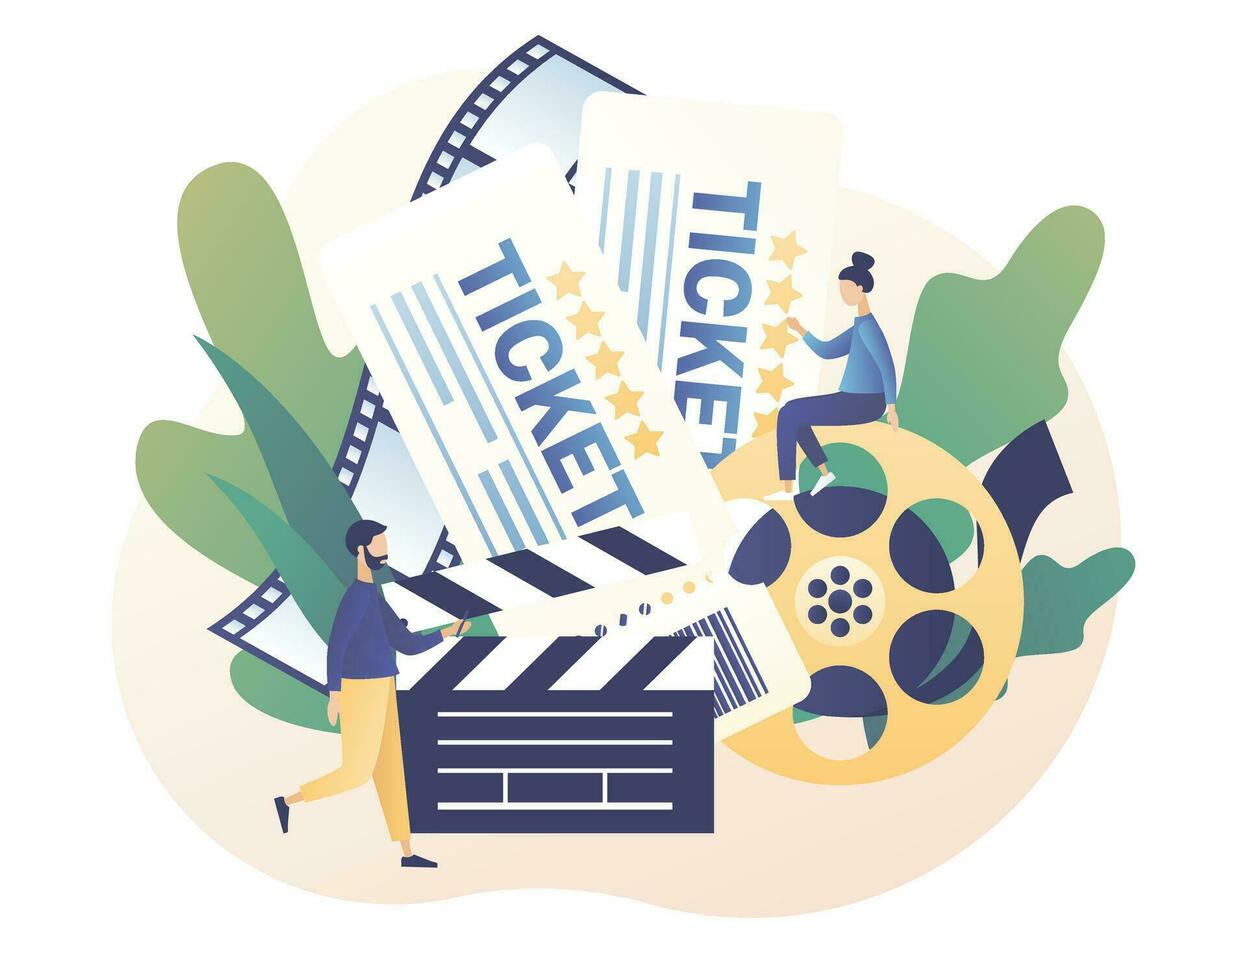 Movie tickets online sale. Online cinema. Tiny people buy tickets on the internet. Cinematography. Modern flat cartoon style. Vector illustration on white background